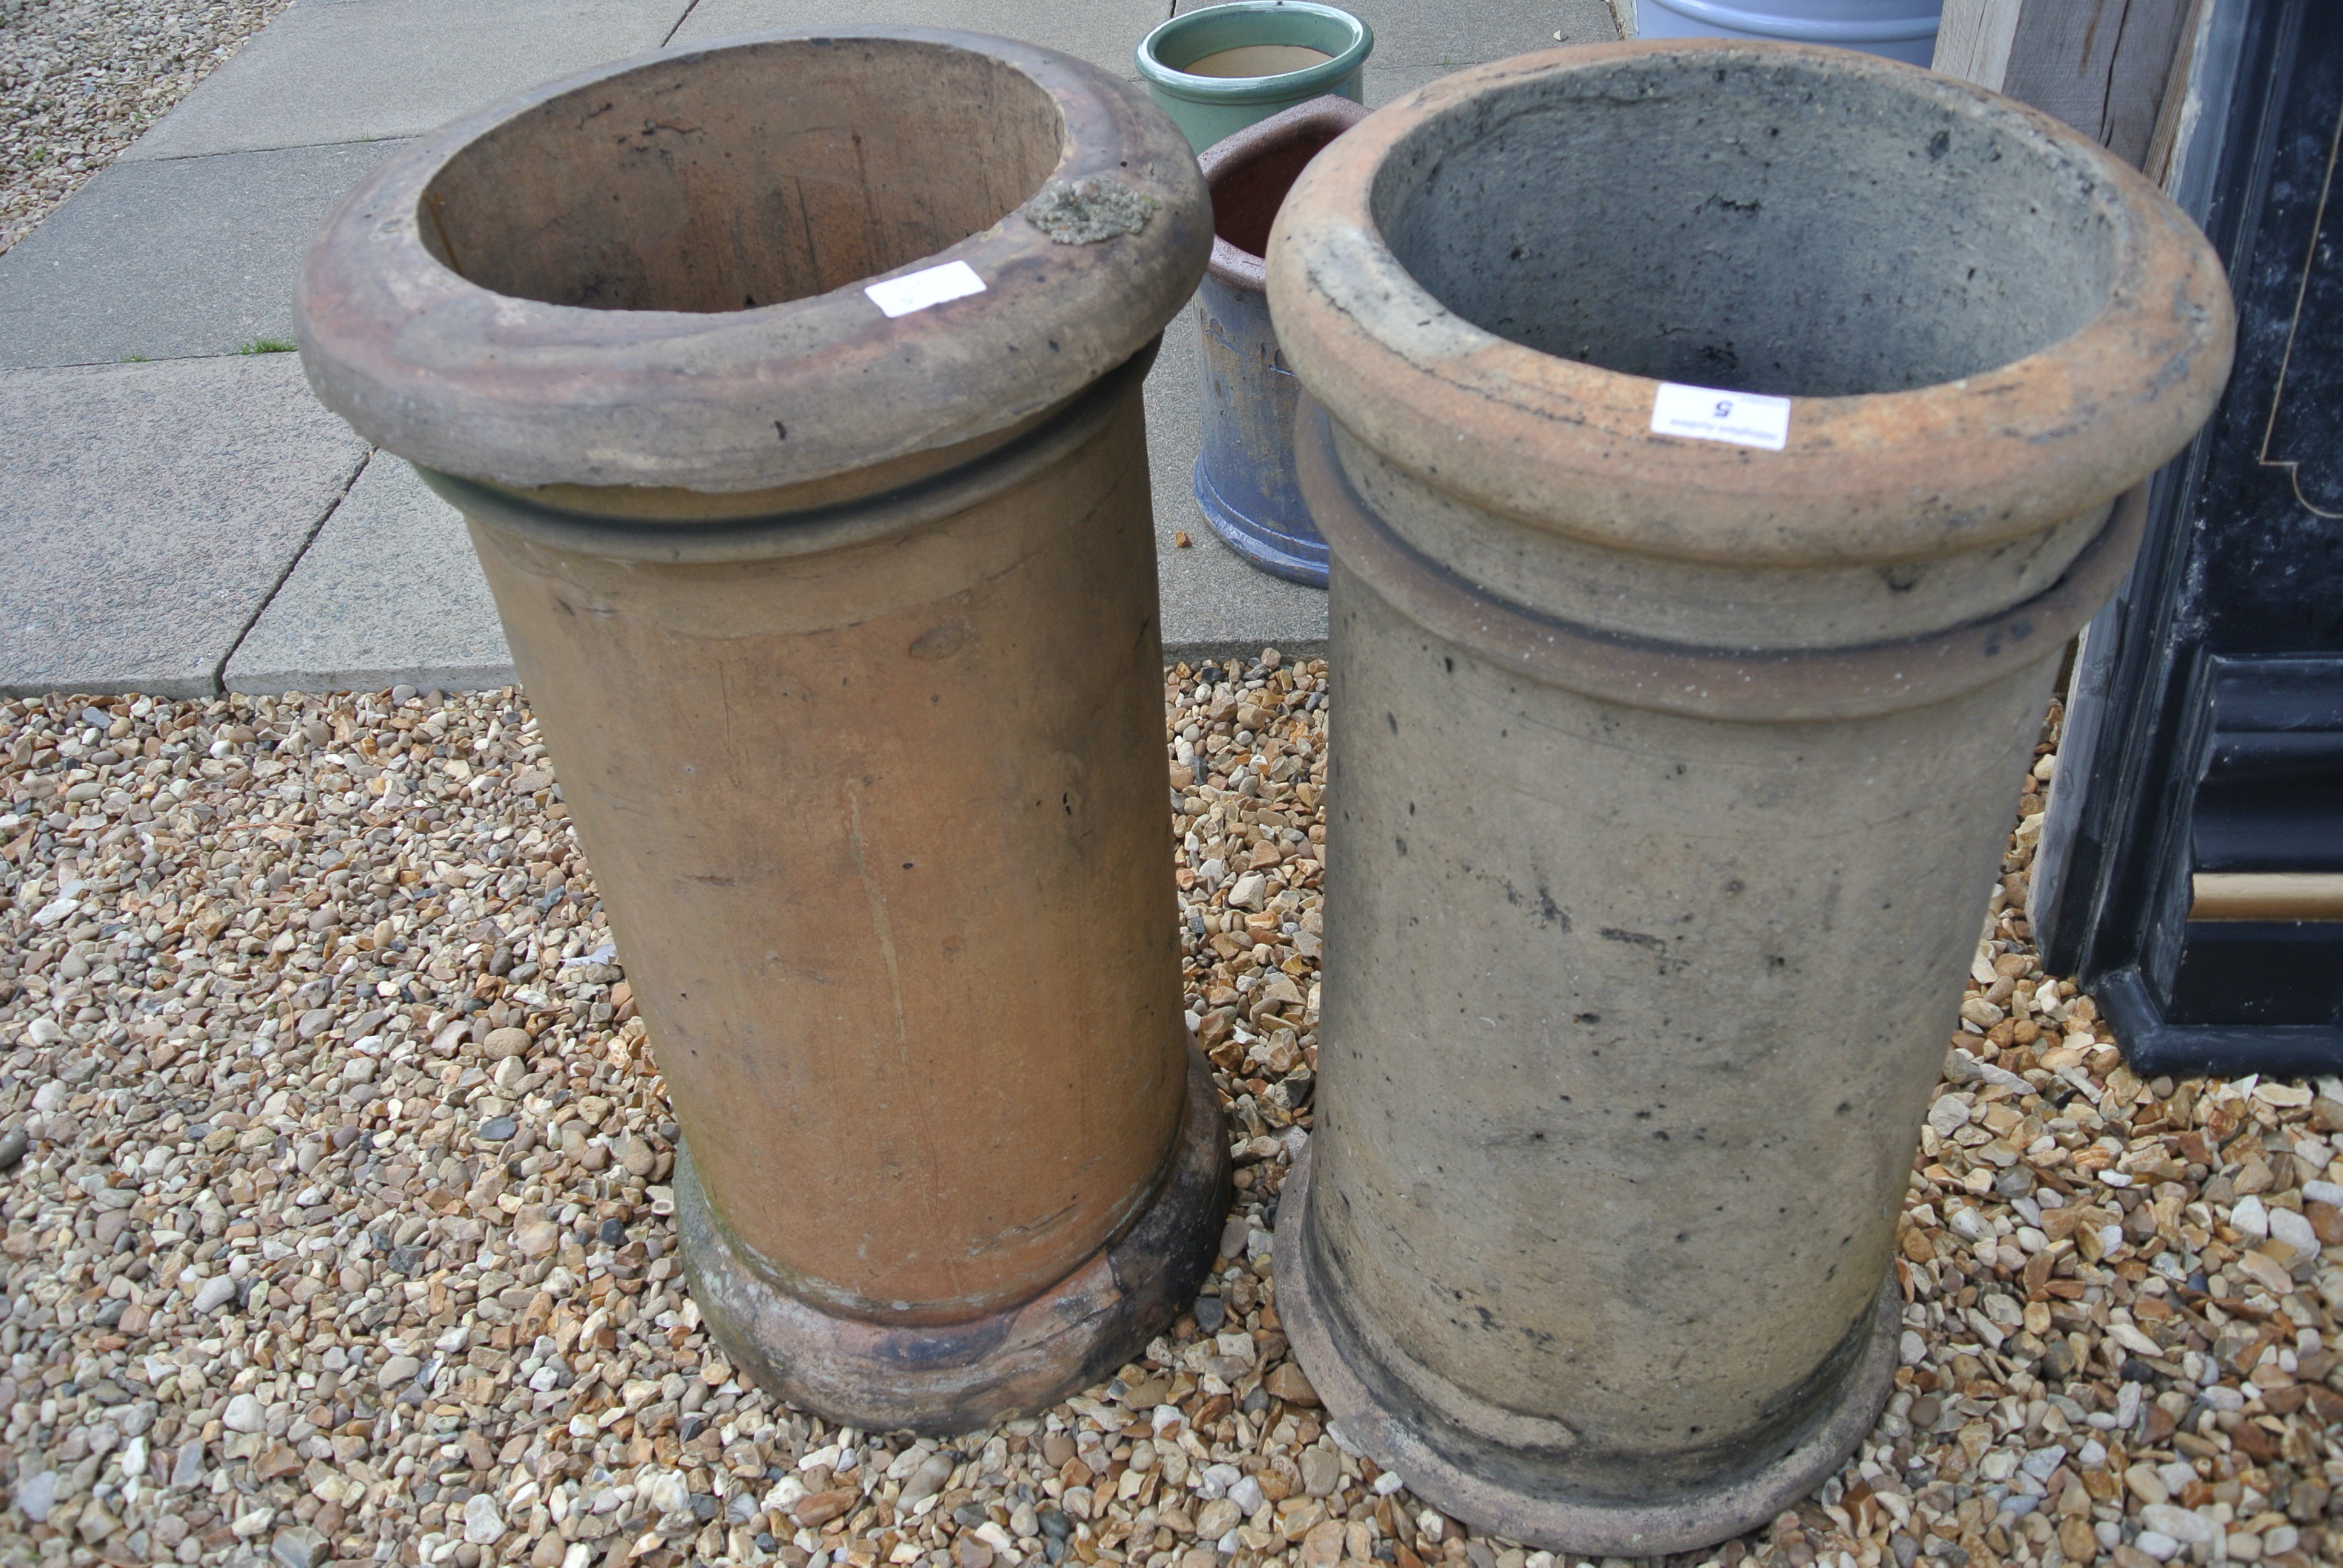 Two cylinder chimney pots,